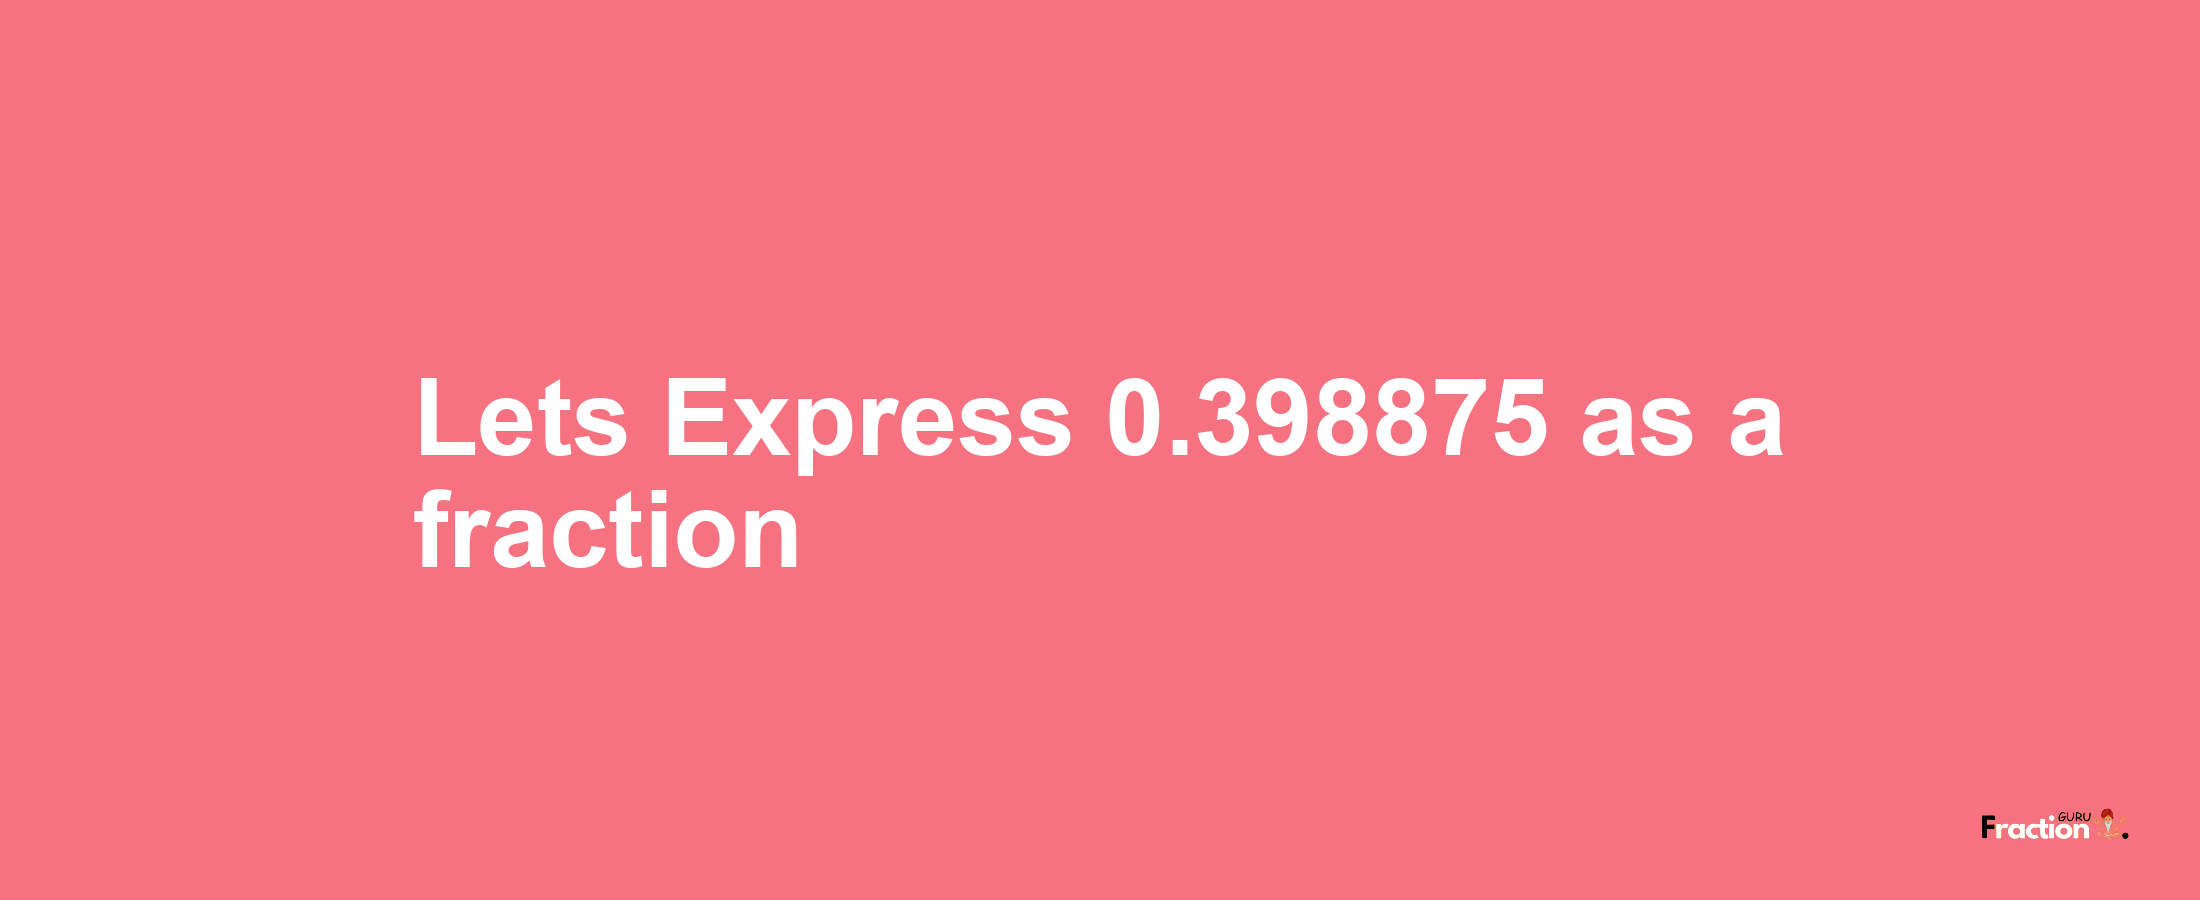 Lets Express 0.398875 as afraction